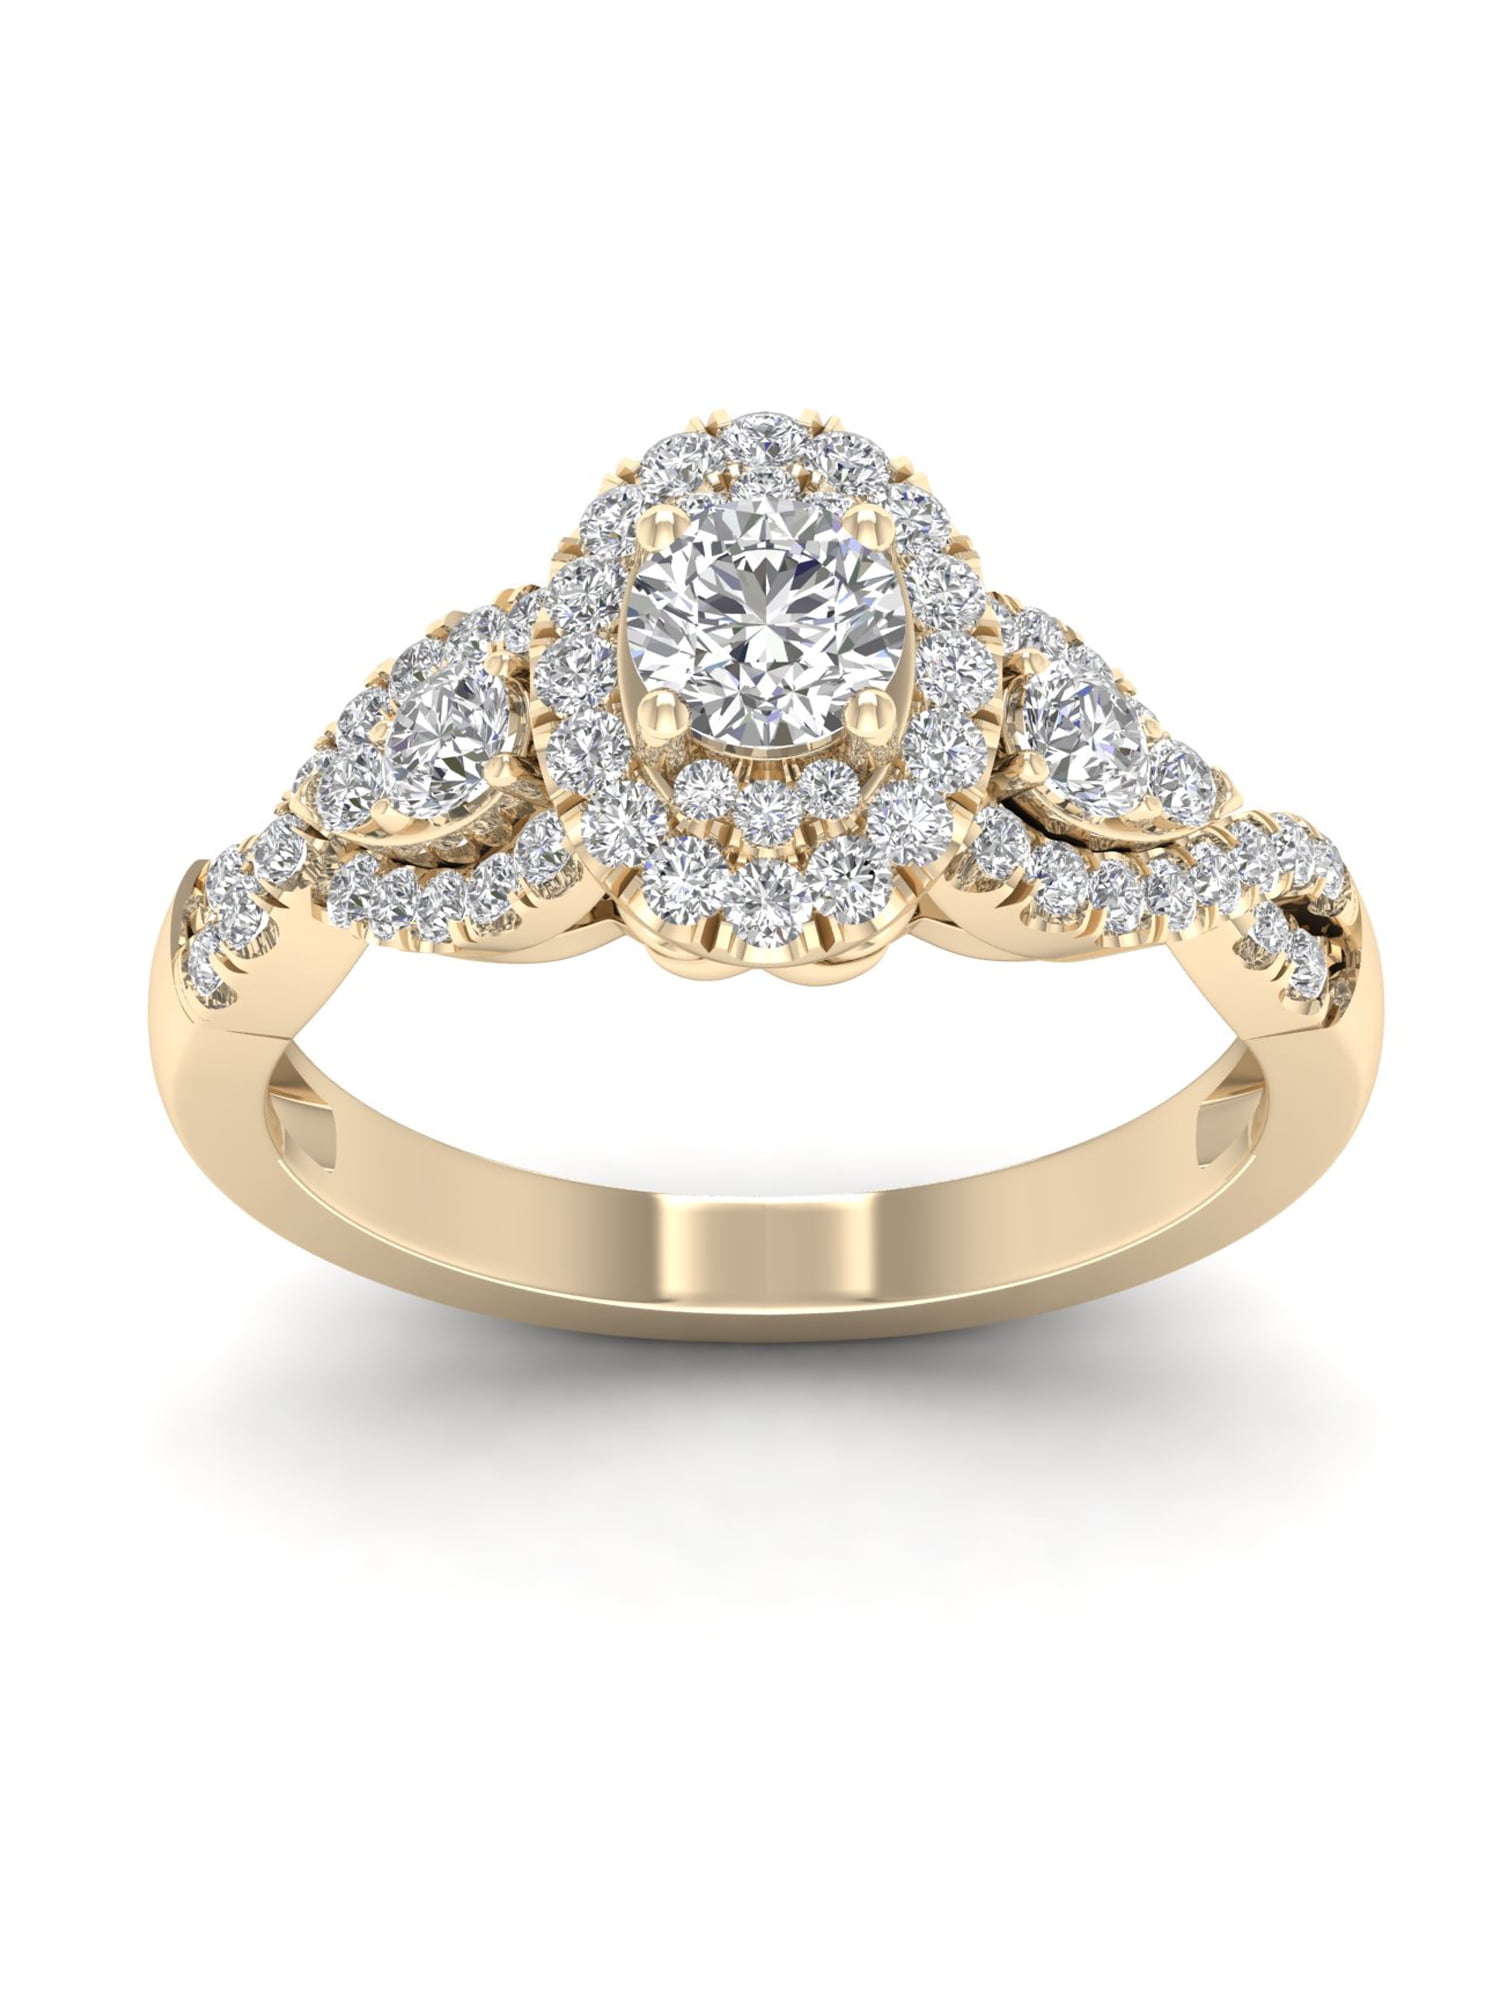 Enter Raffle to Win 3ct Moissanite Ring hosted by Dazzling Delights